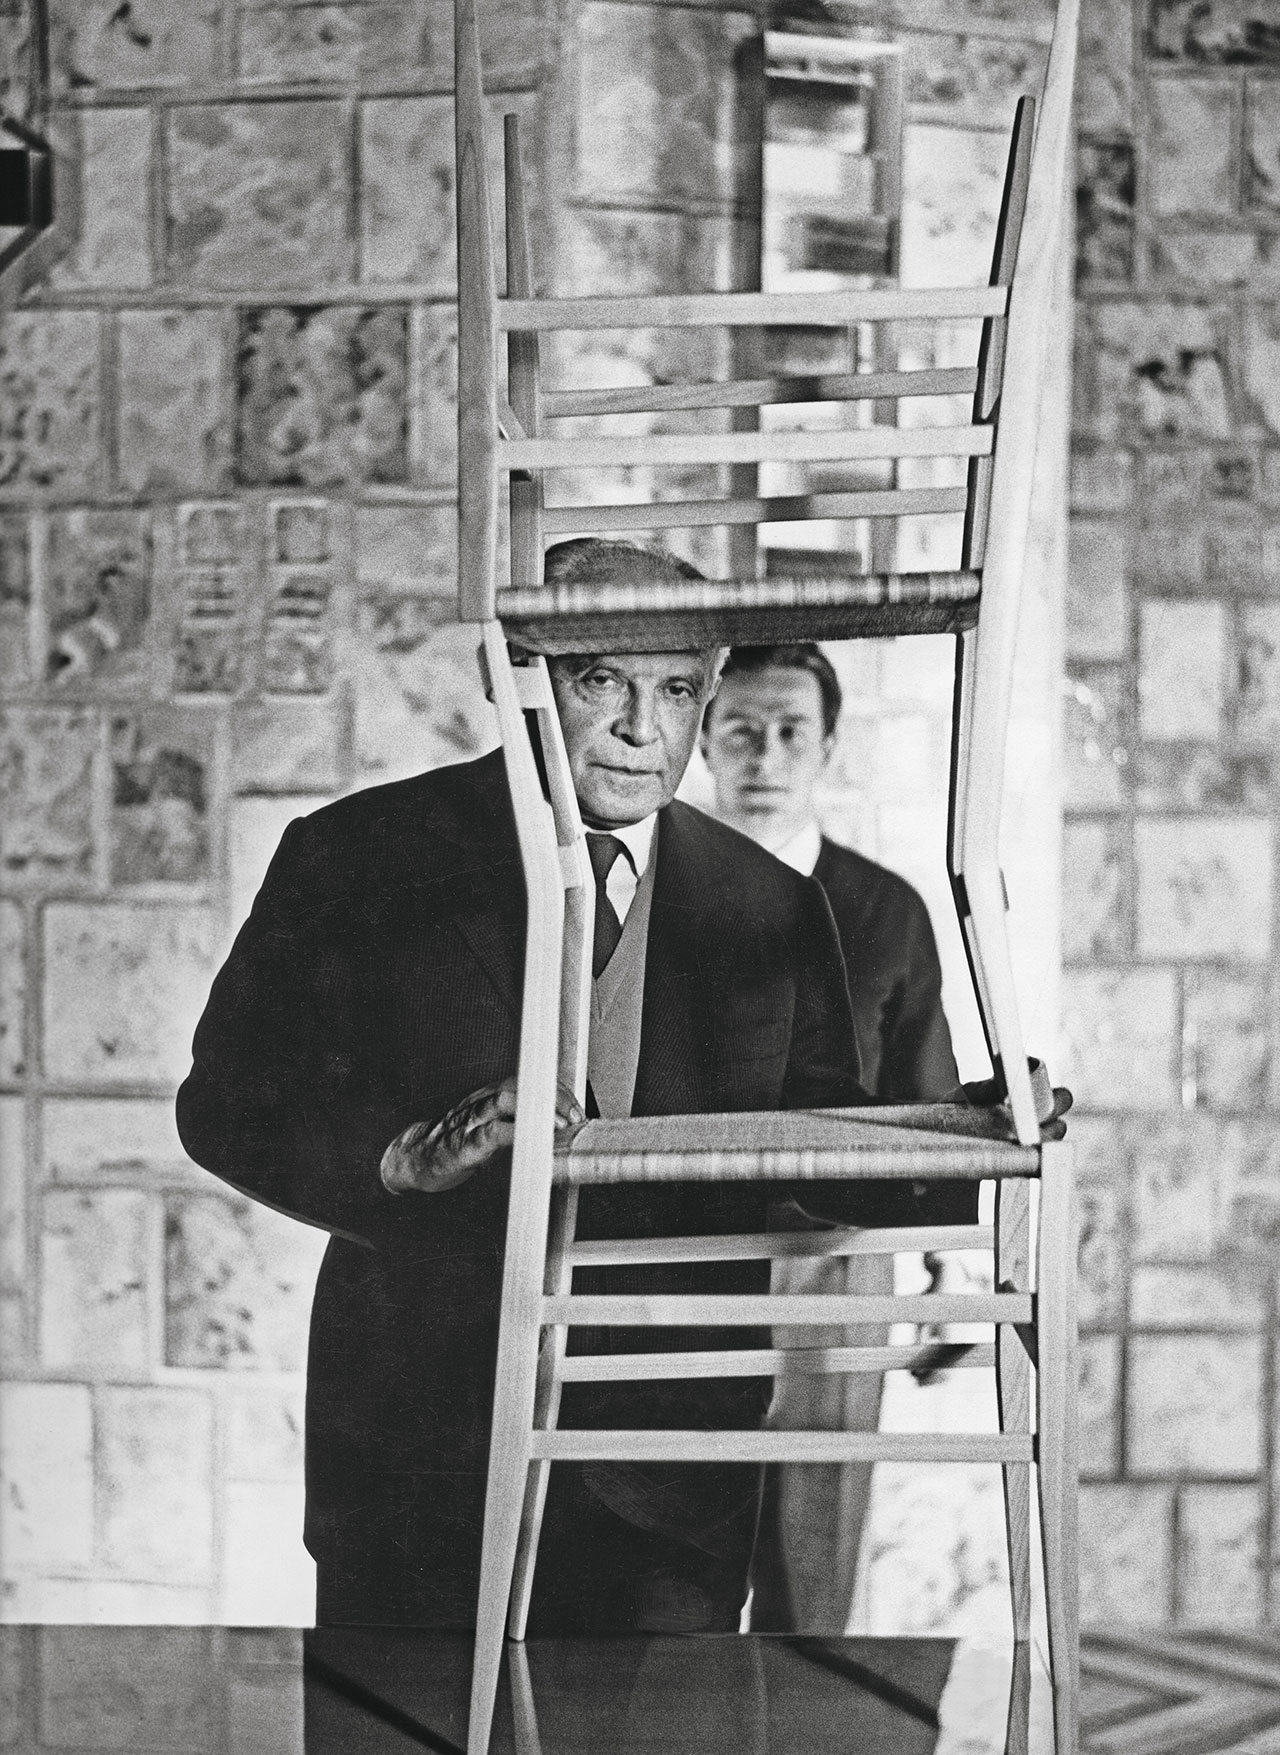 Gio Ponti and his son Giulio at the New York Alitalia offices, with the Superleggera chairs produced by Cassina, 1957. © Gio Ponti Archives/ Historical Archive of Ponti’s Heirs. Photo by Dan Wynn.